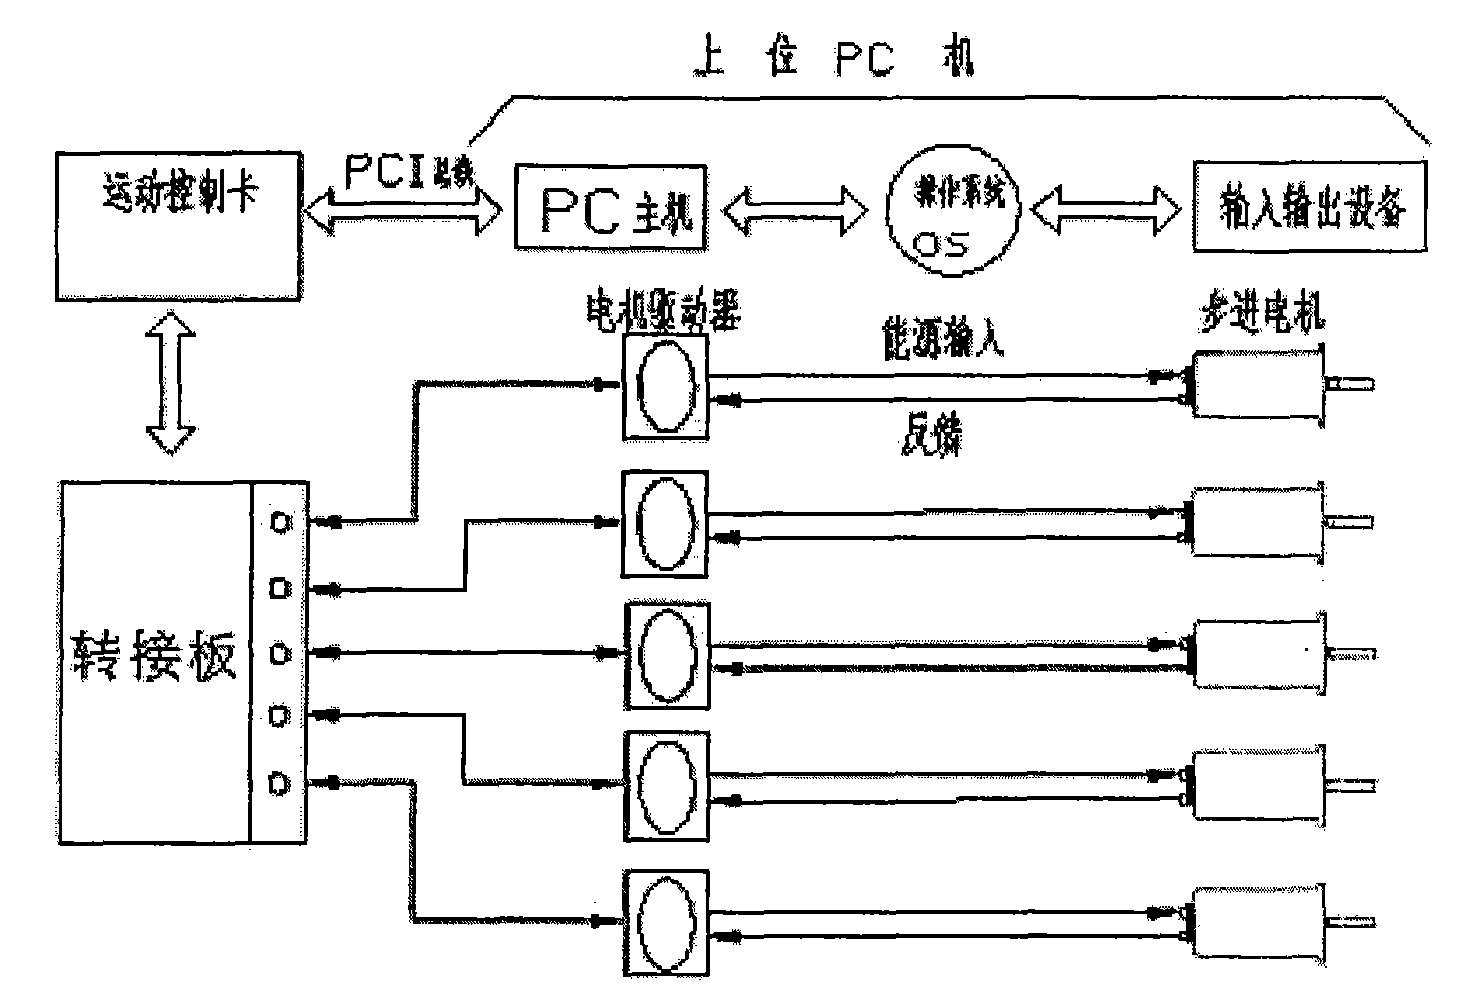 Control method for processing five-rod five-ring parallel kinematic machine tool